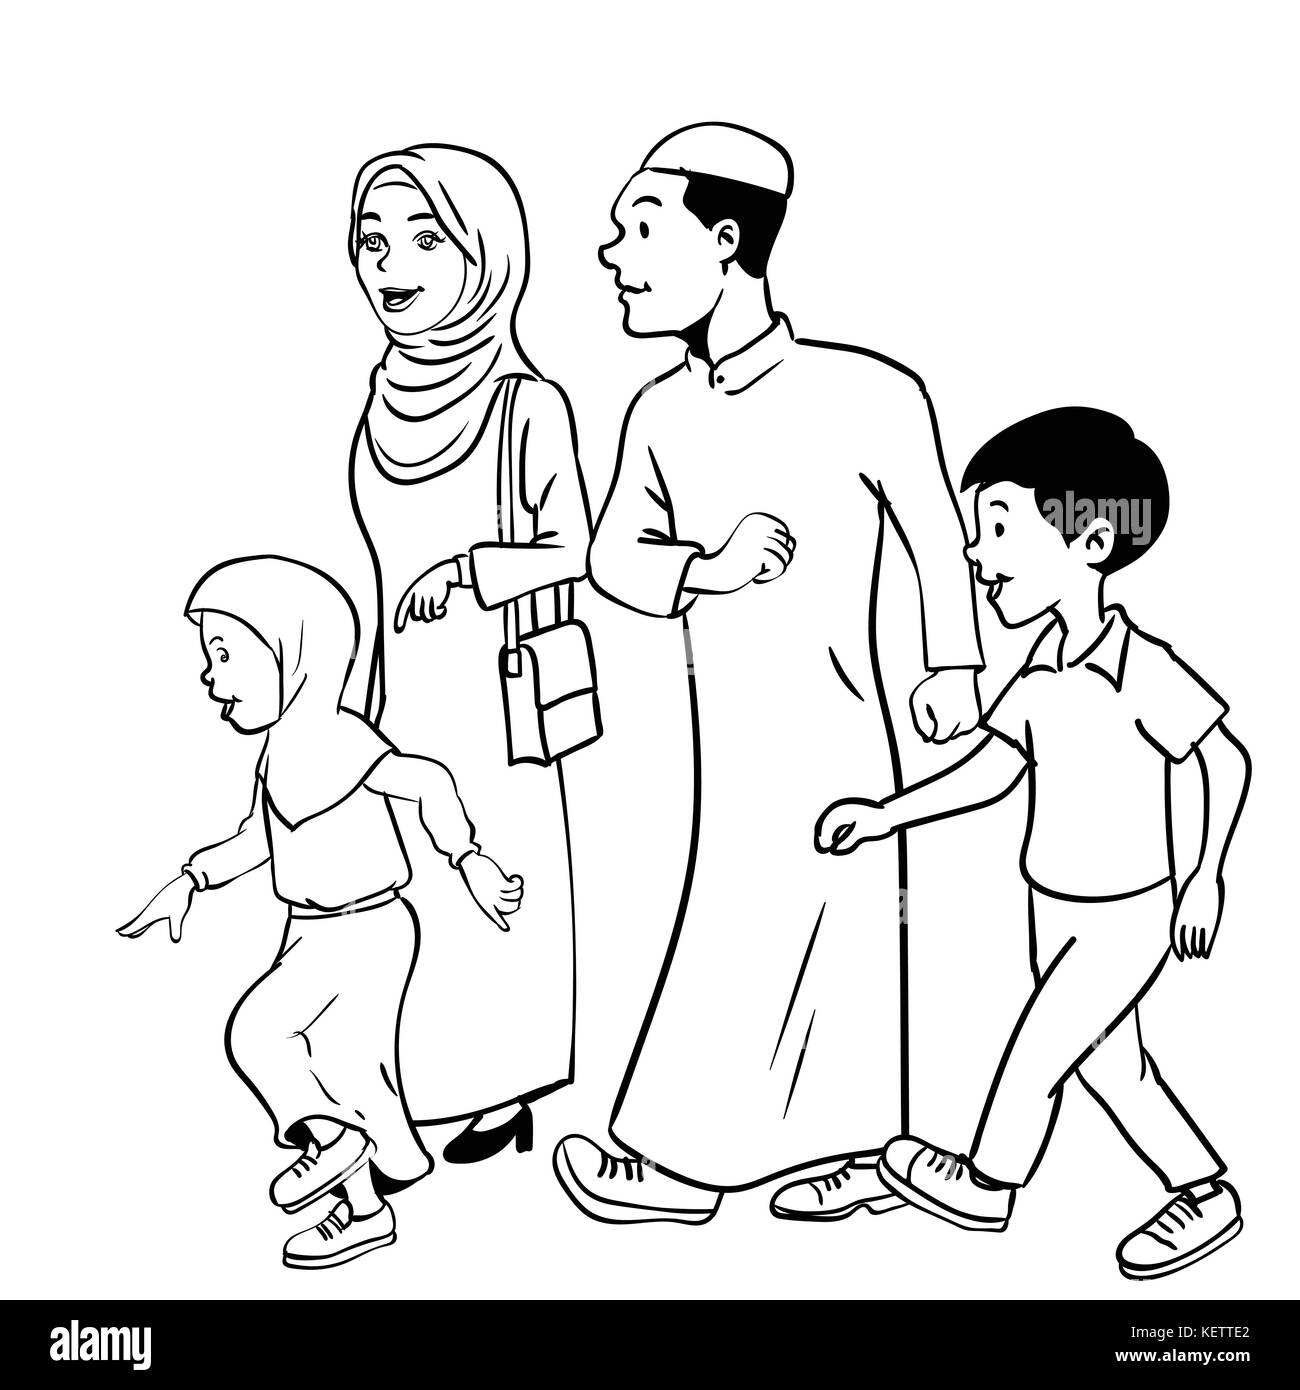 Illustration of Muslim family Waliking, for Happy Muslim family, isolated on white background. Black and White simple line Vector Illustration for Col Stock Vector